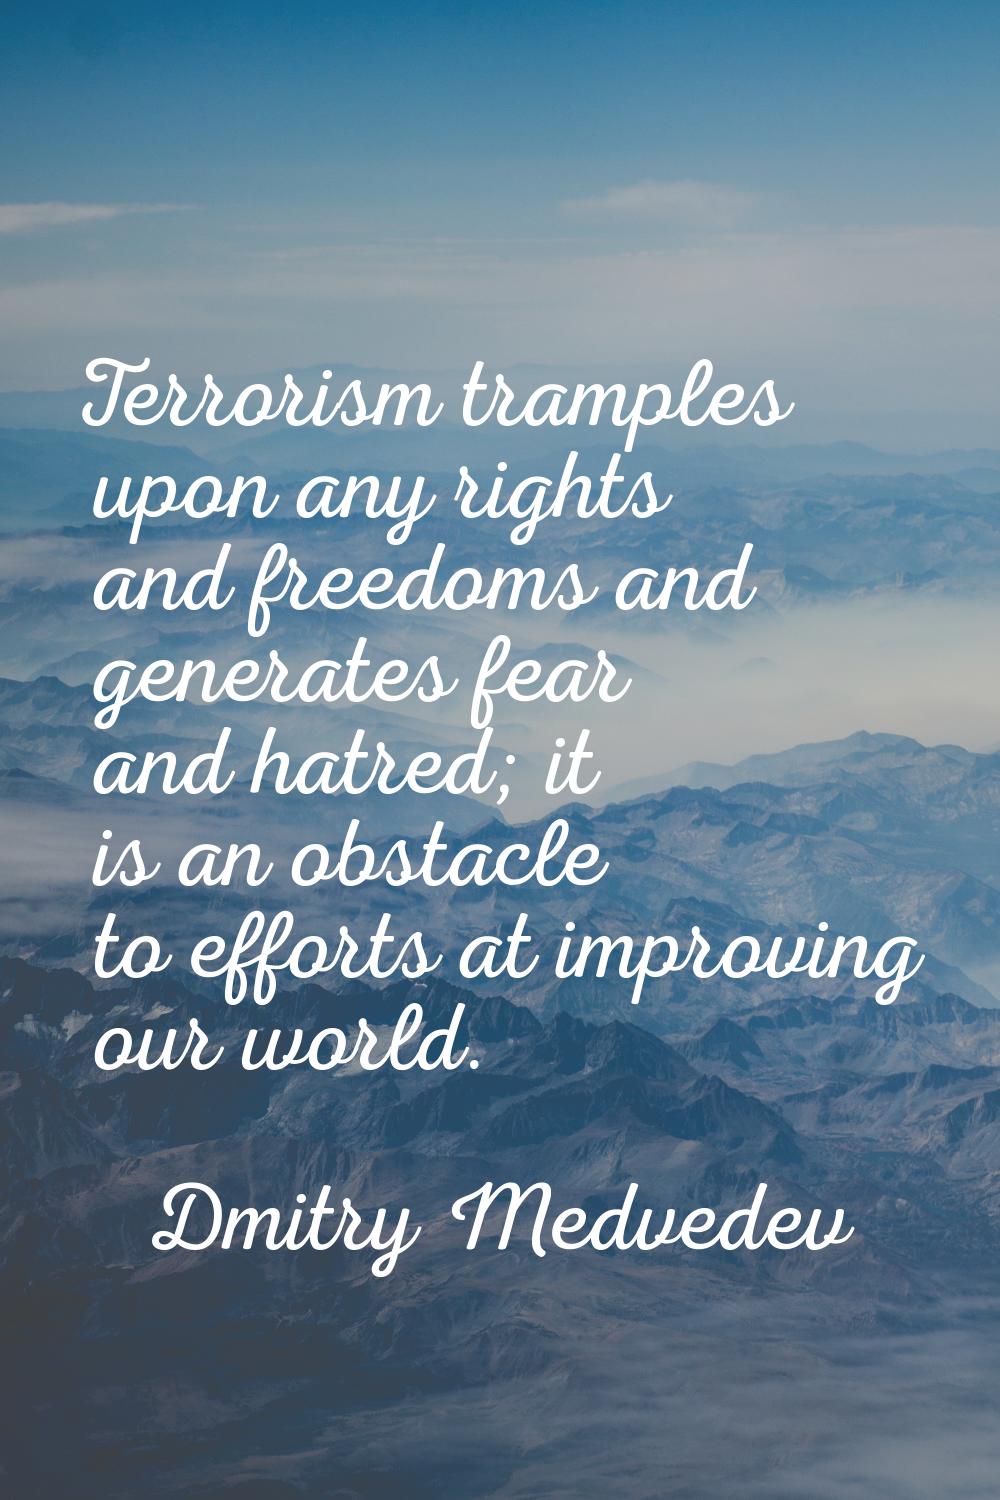 Terrorism tramples upon any rights and freedoms and generates fear and hatred; it is an obstacle to